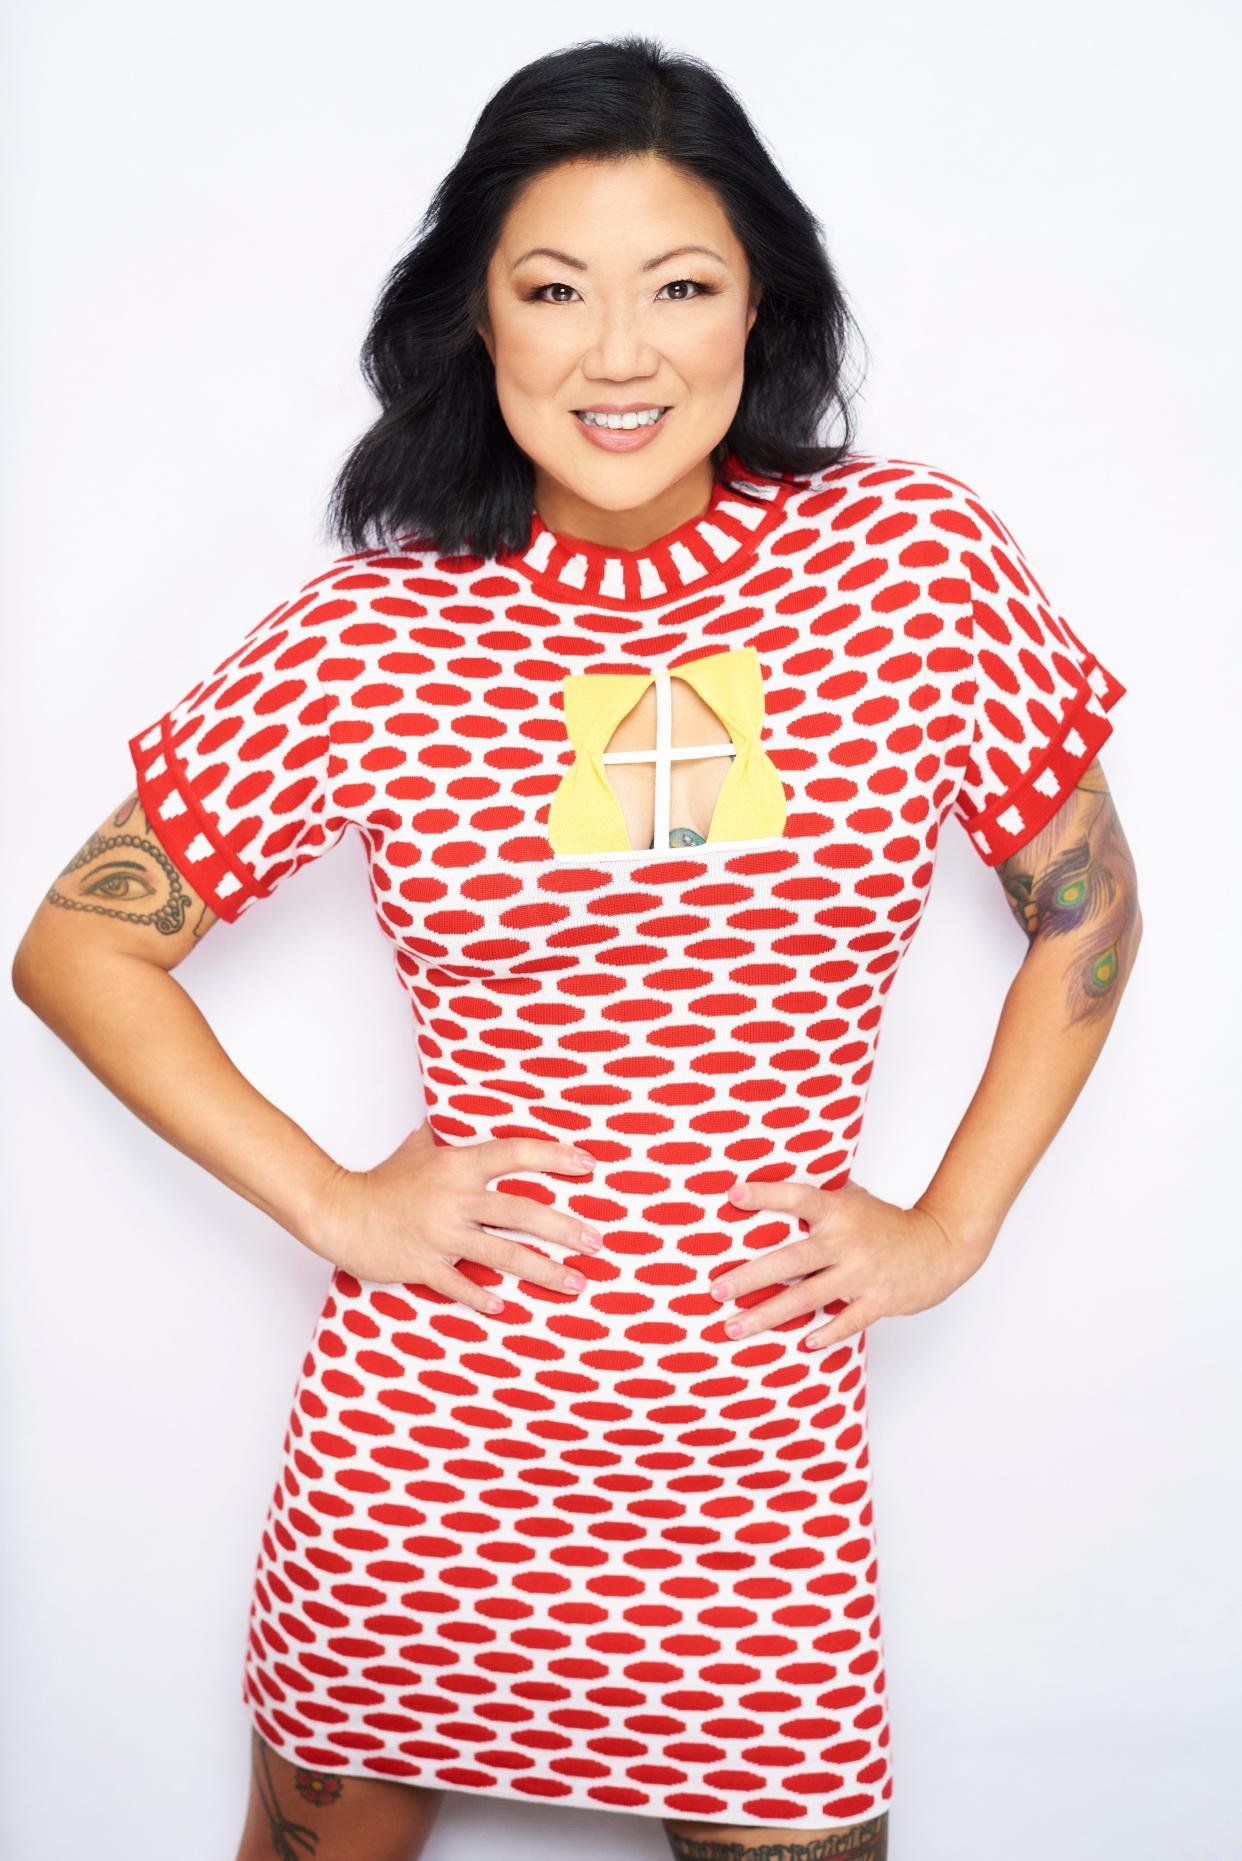 Comedian Margaret Cho headlined Moontower Comedy Festival this month.